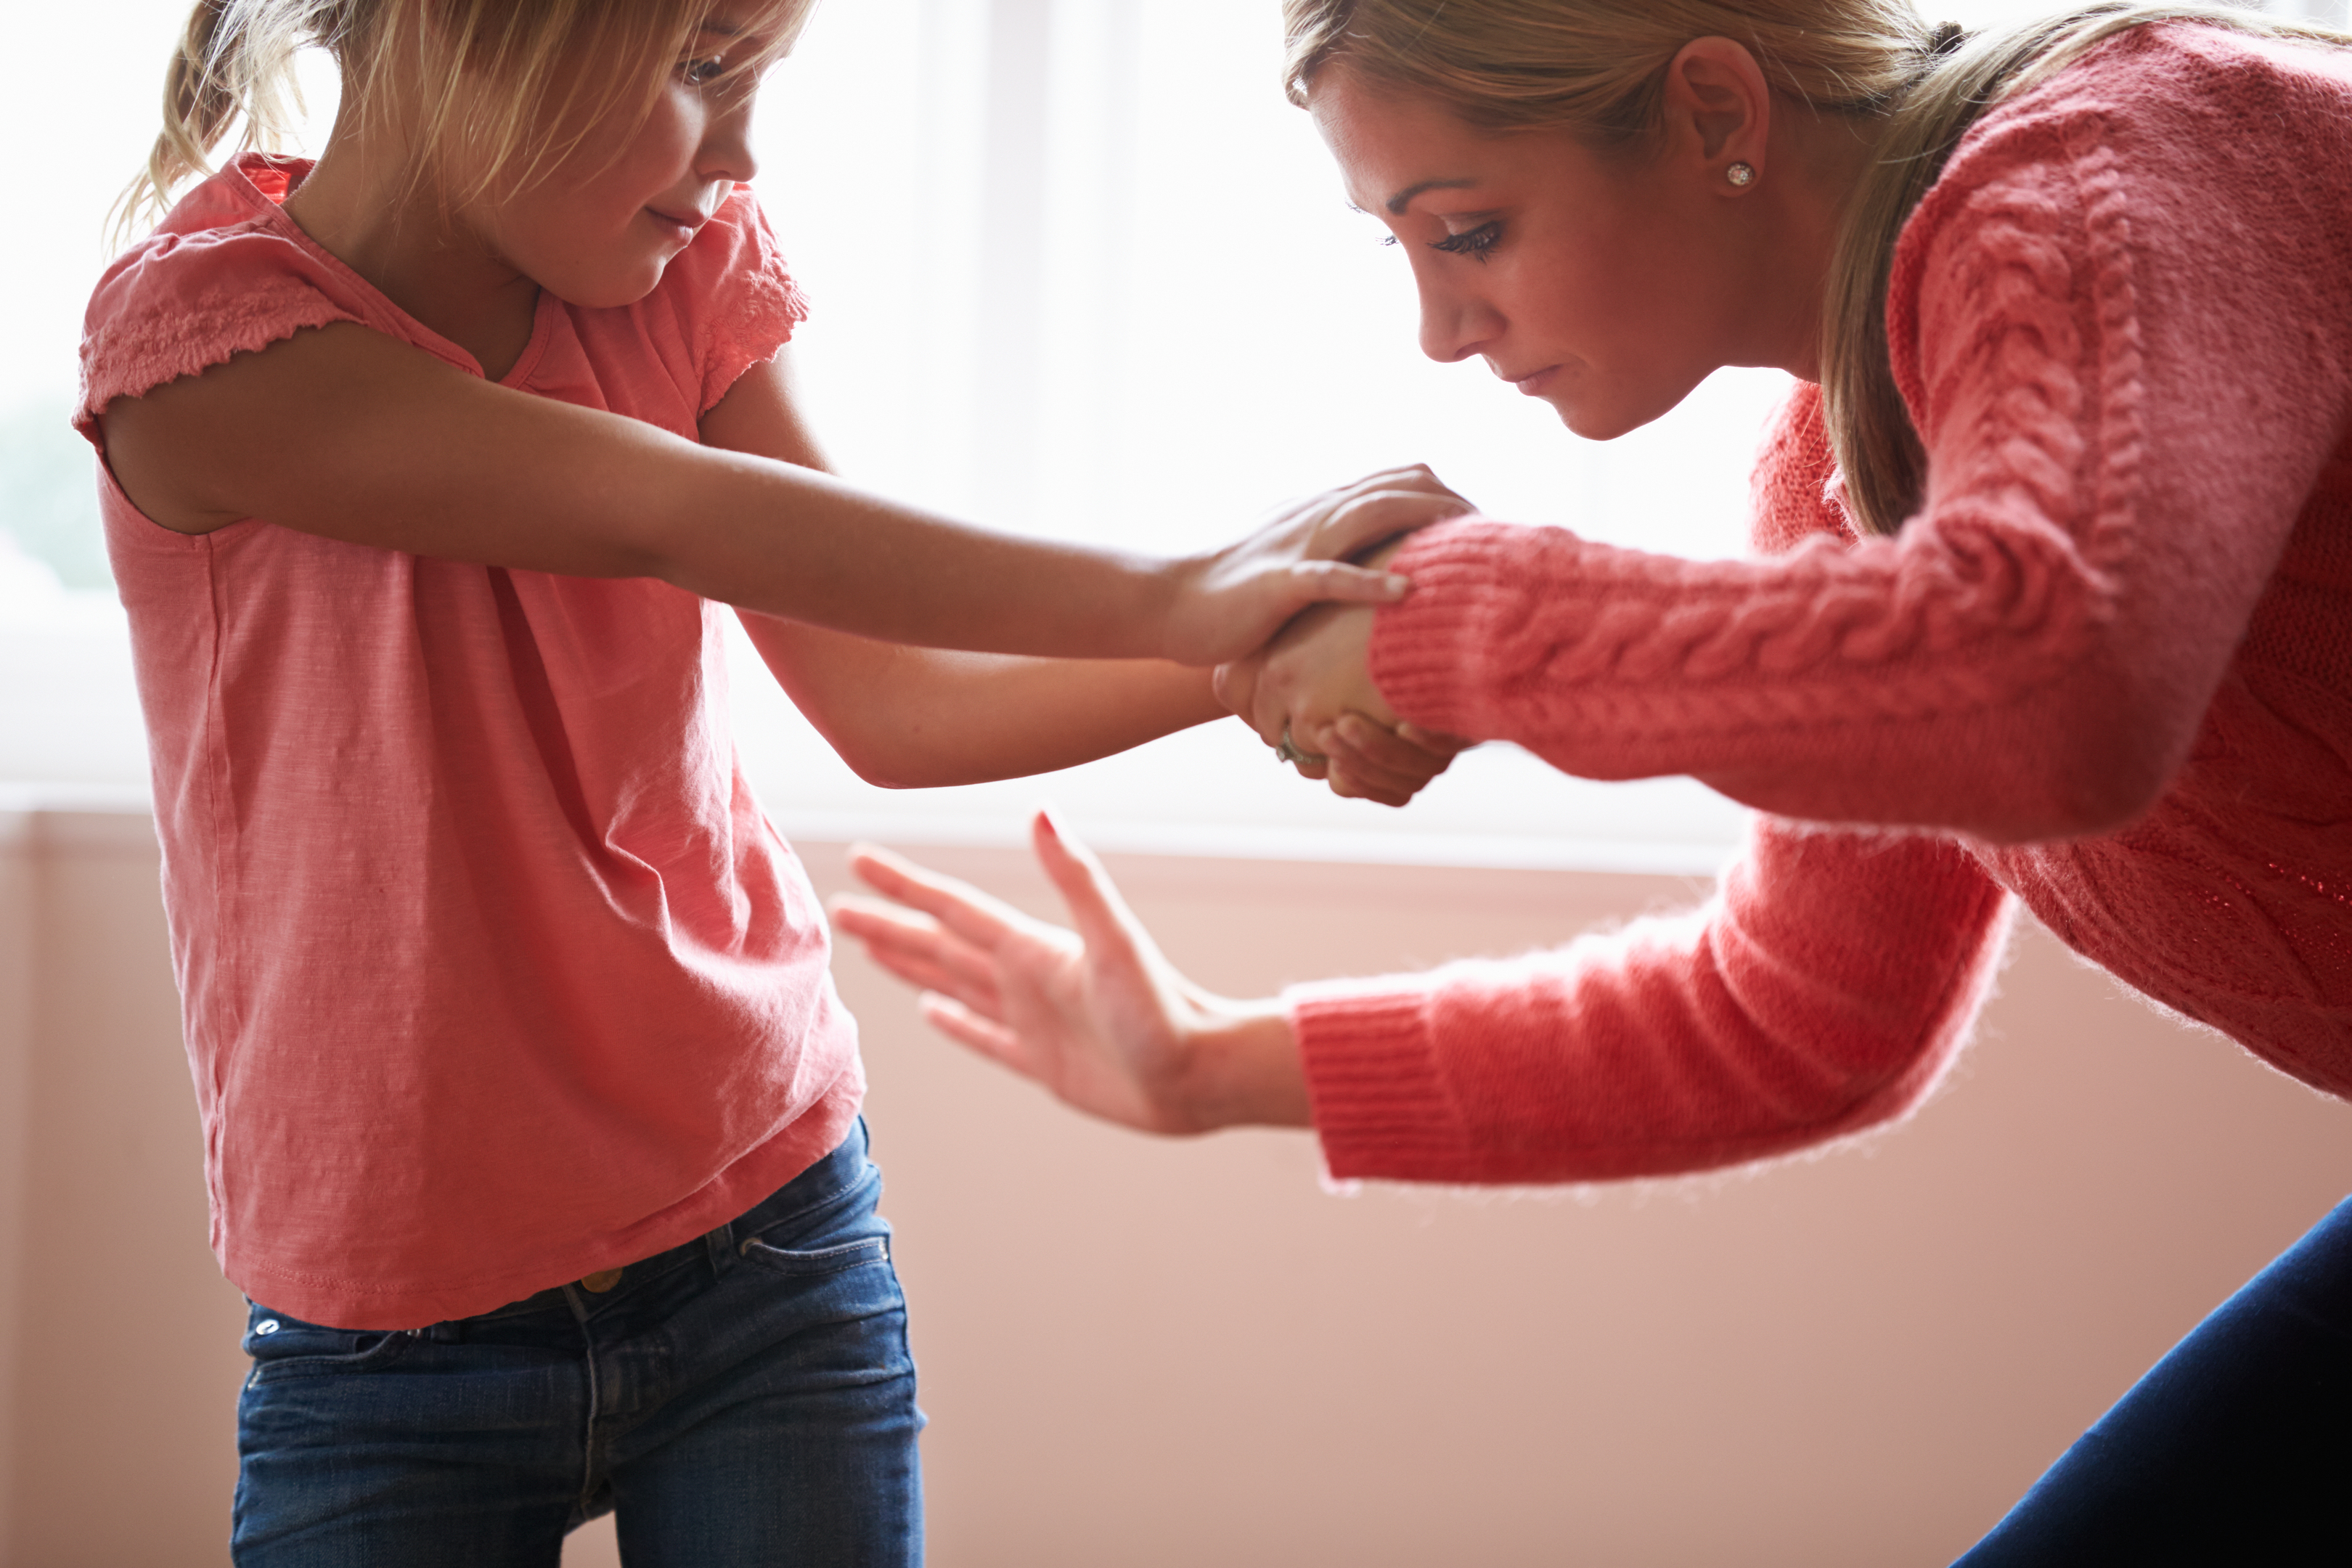 Scotland to become the first part of the UK to introduce a ban on smacking children (iStock)